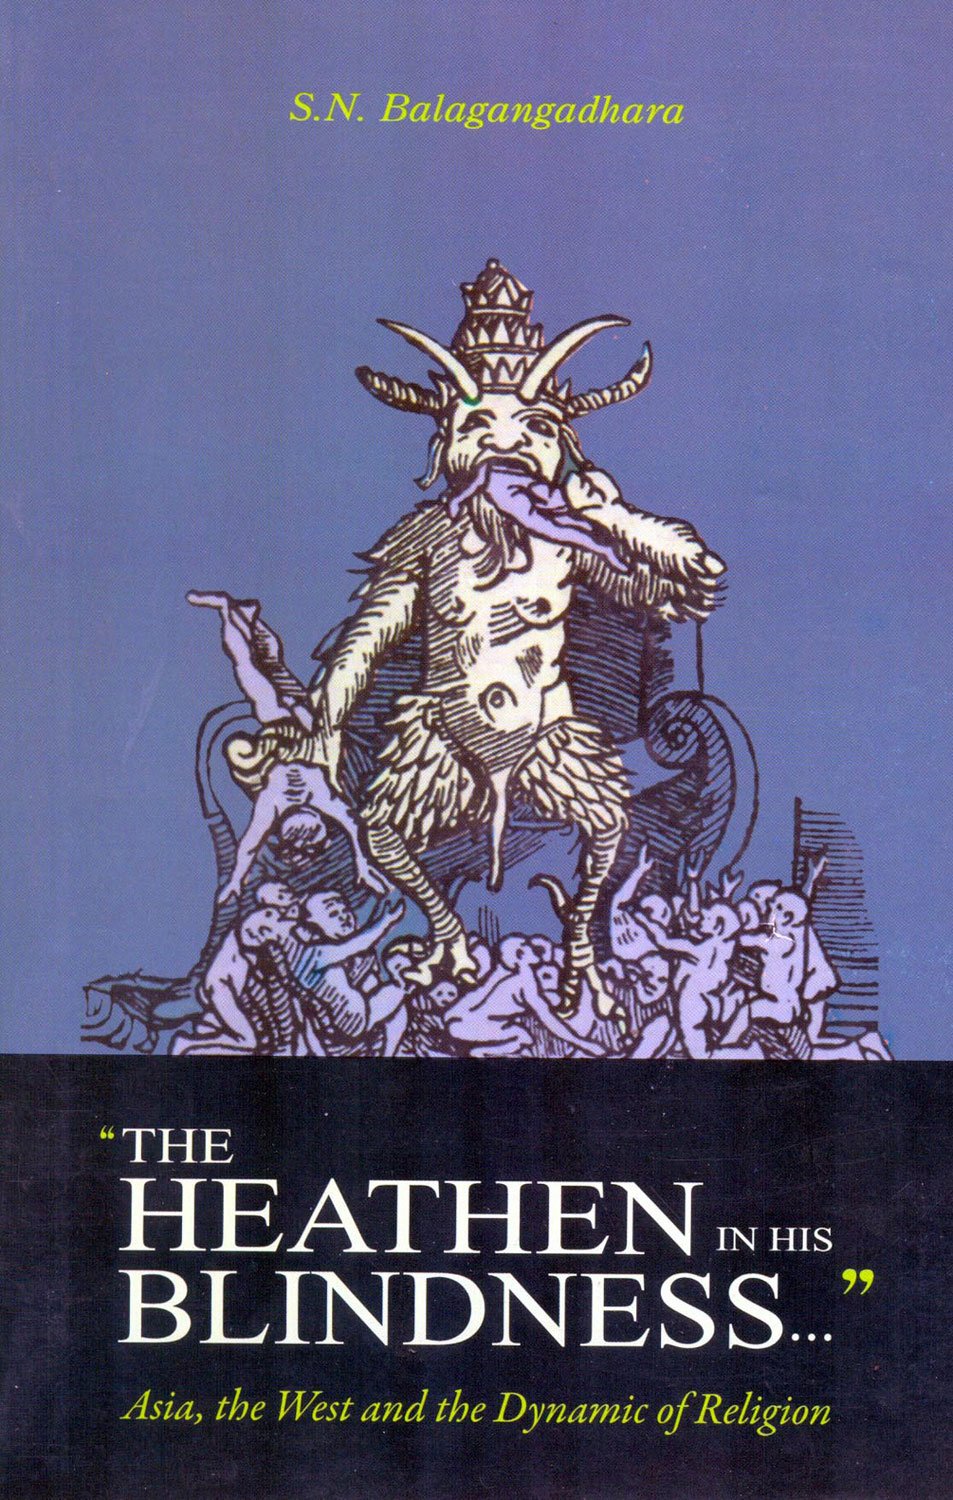 The Heathen in his Blindness...: Asia, the West and the Dynamic of Religion